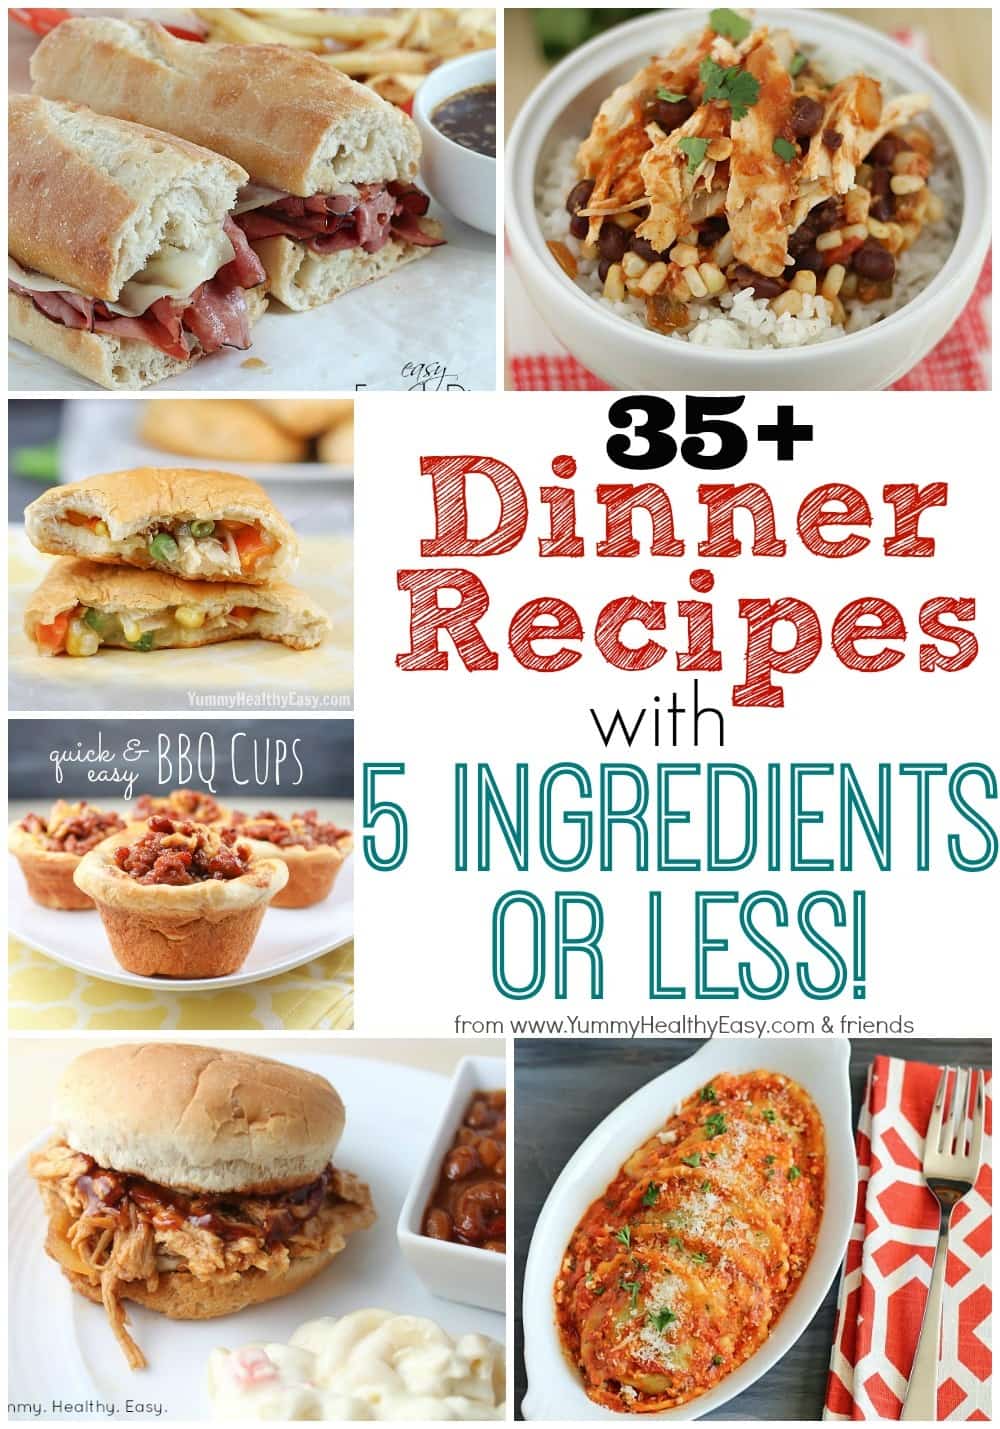 35+ Dinner Recipes with 5 Ingredients or Less